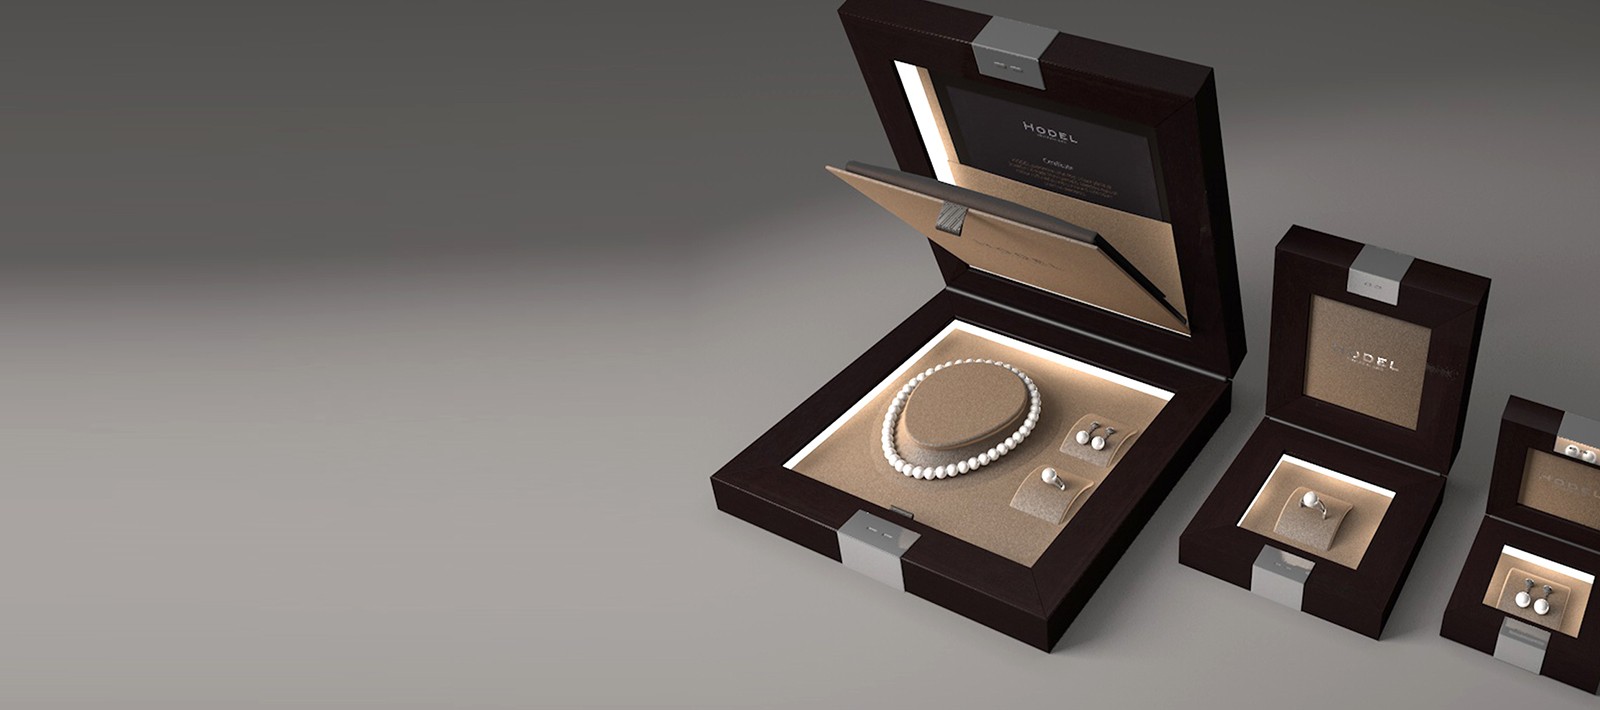 Luxury Packaging Design for a jewelry company.